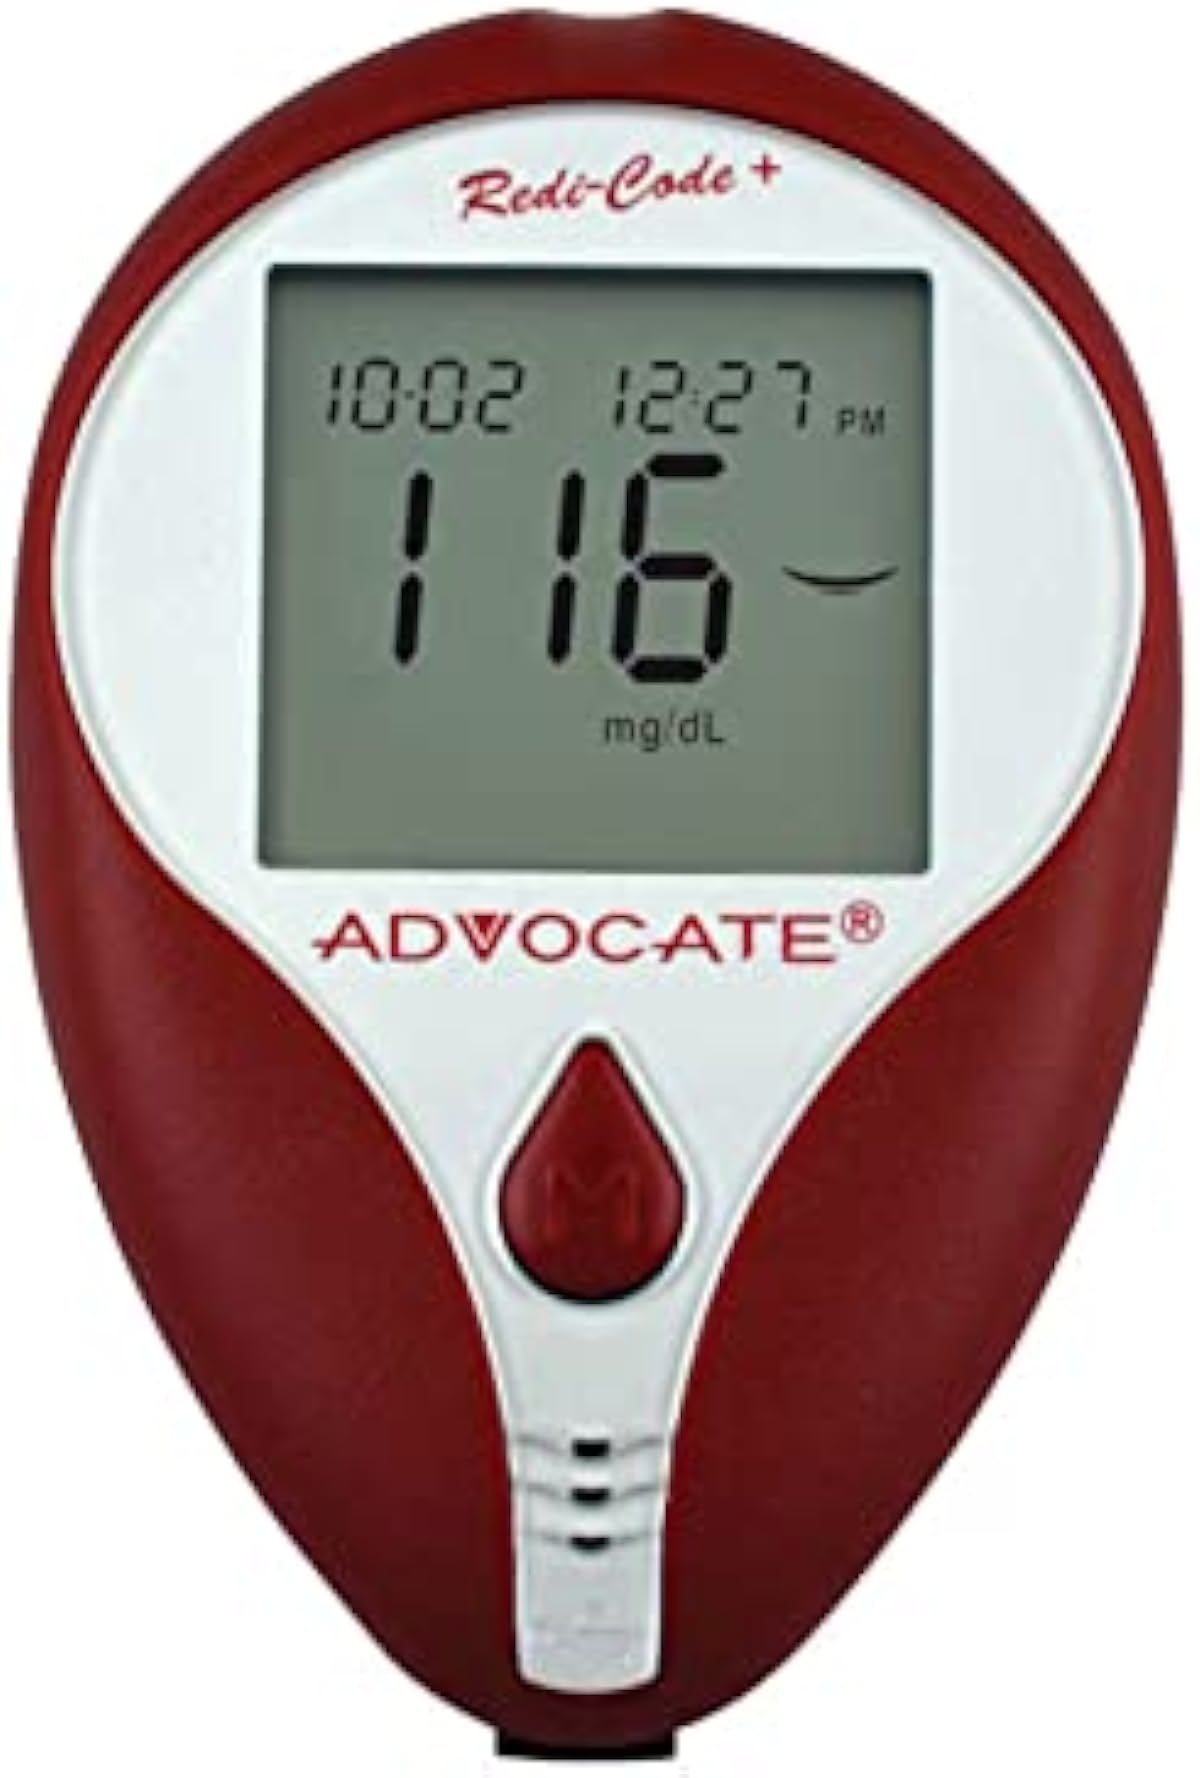 Advocate Redi-Code Plus Blood Glucose Meter - Monitor for Blood Glucose Test Strips - Home Care Blood Glucometer Kit